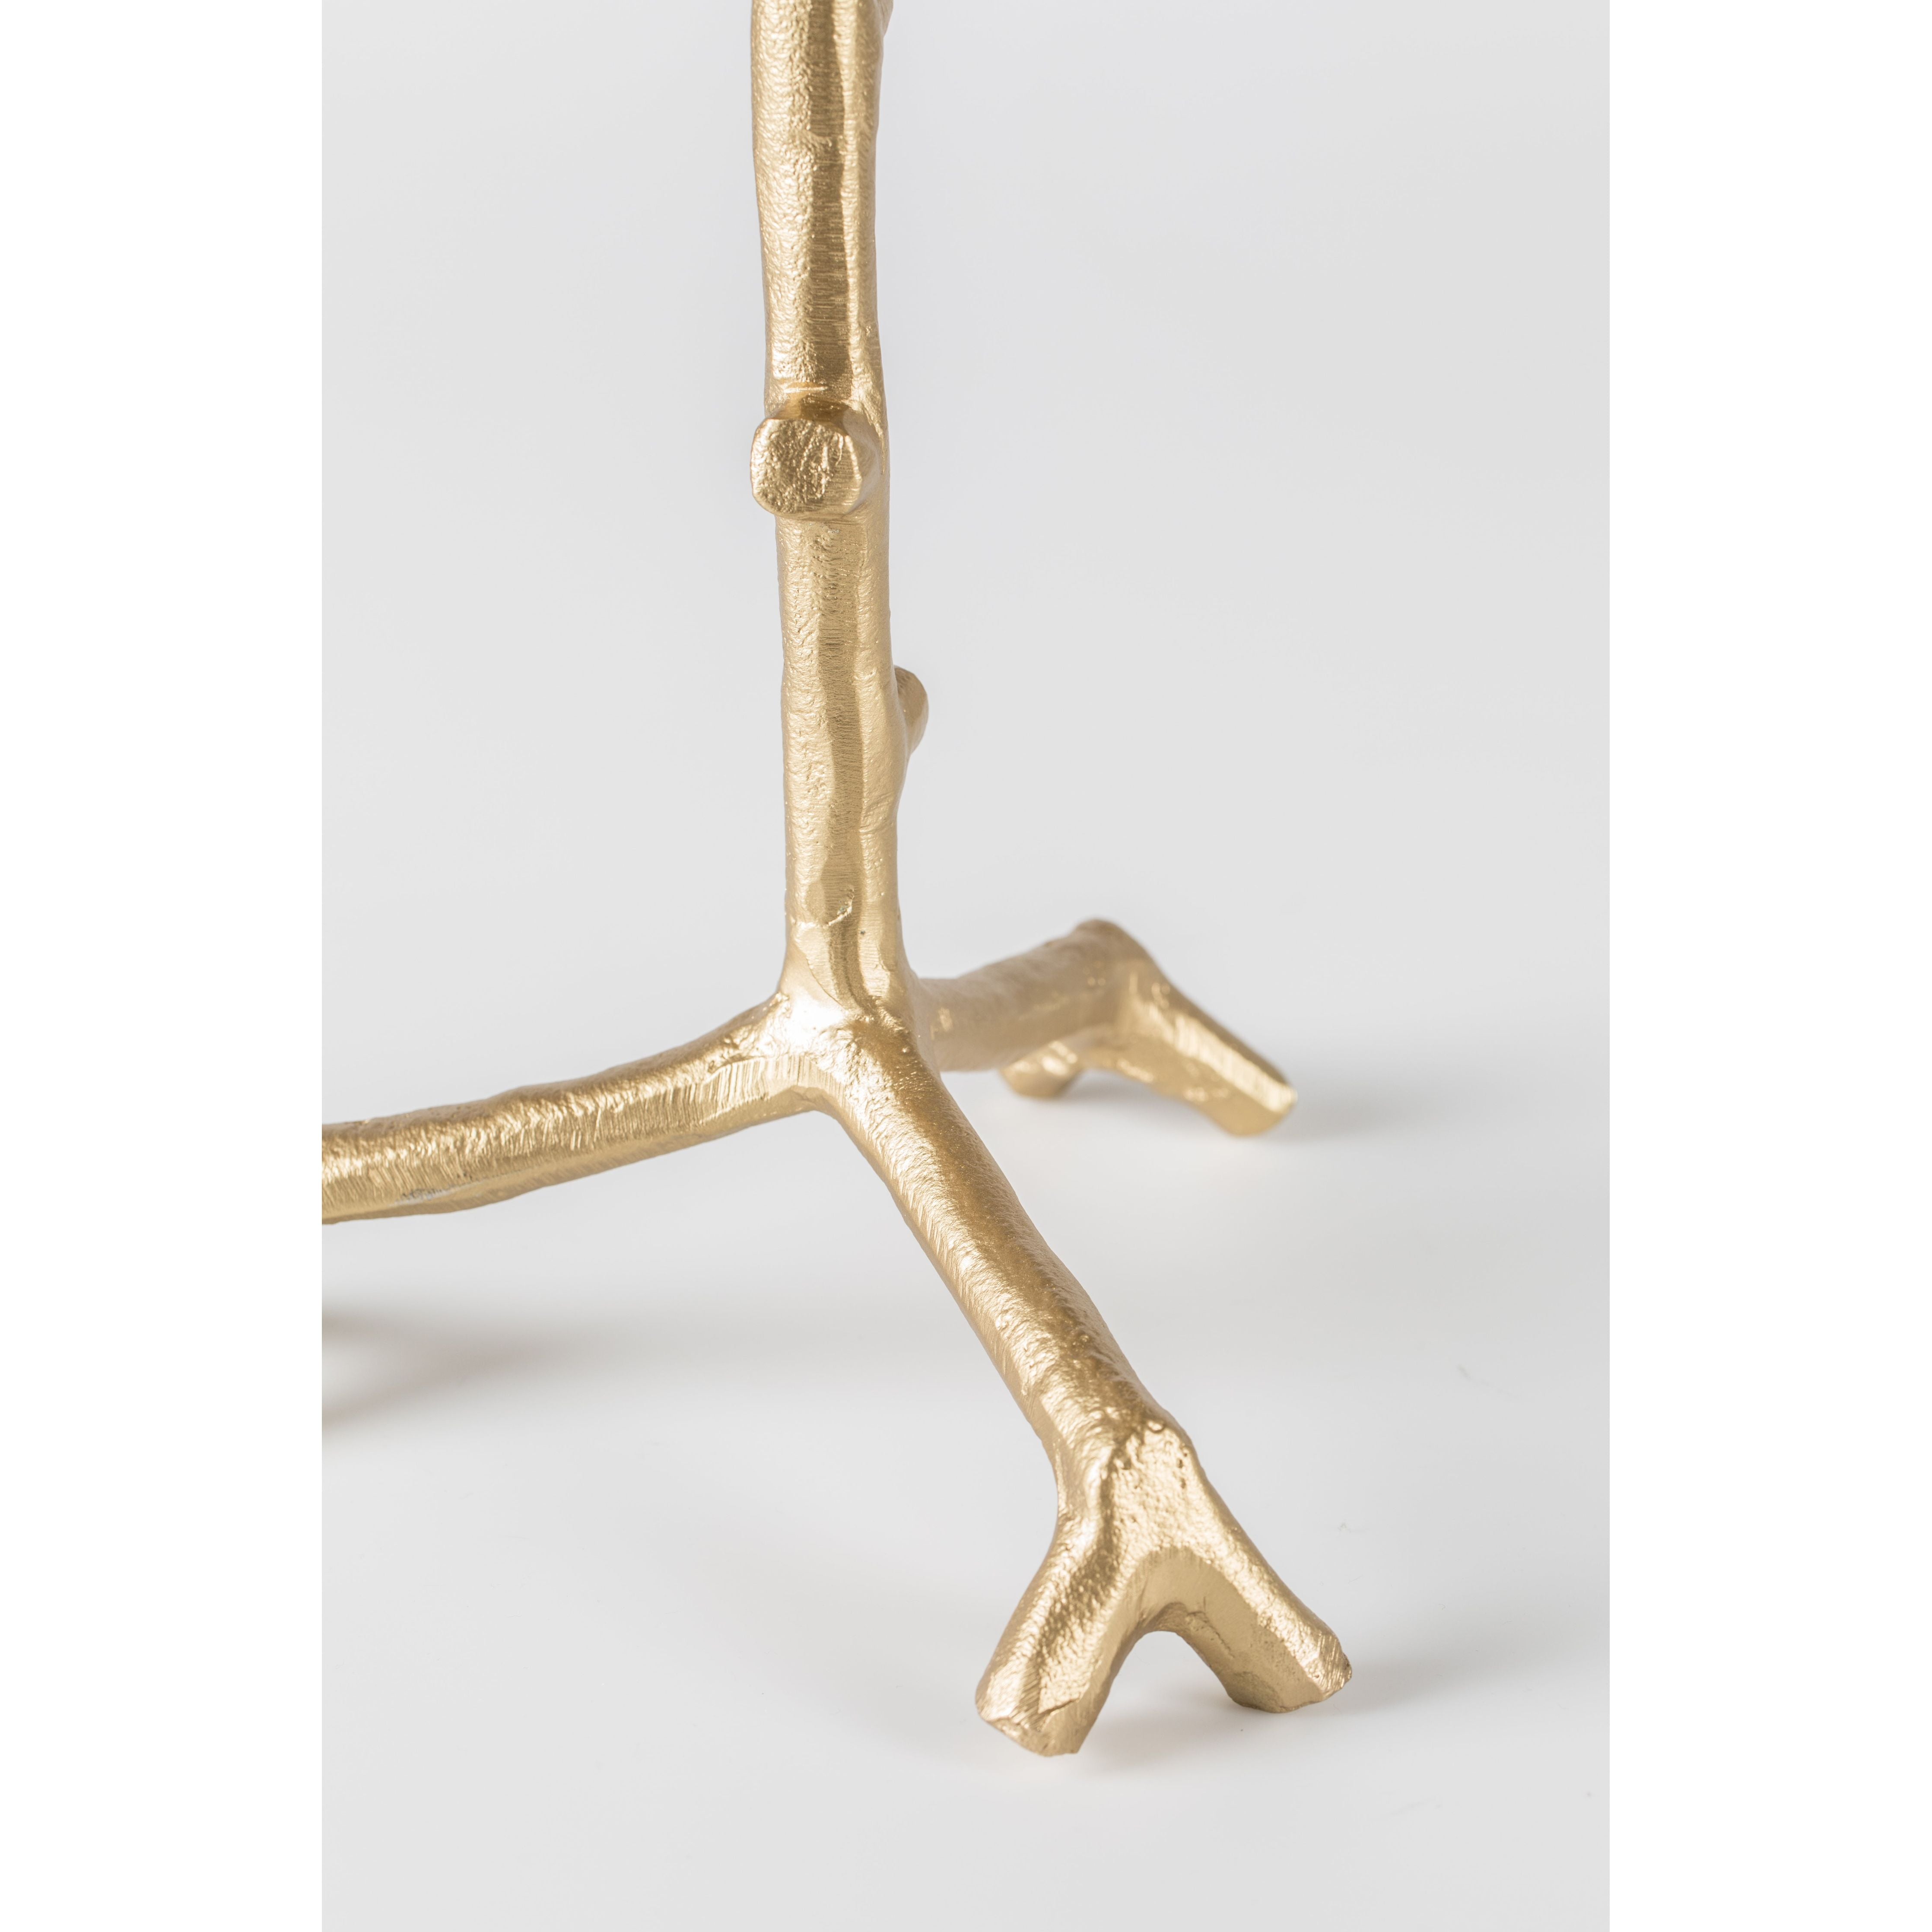 Sidetable lily single gold